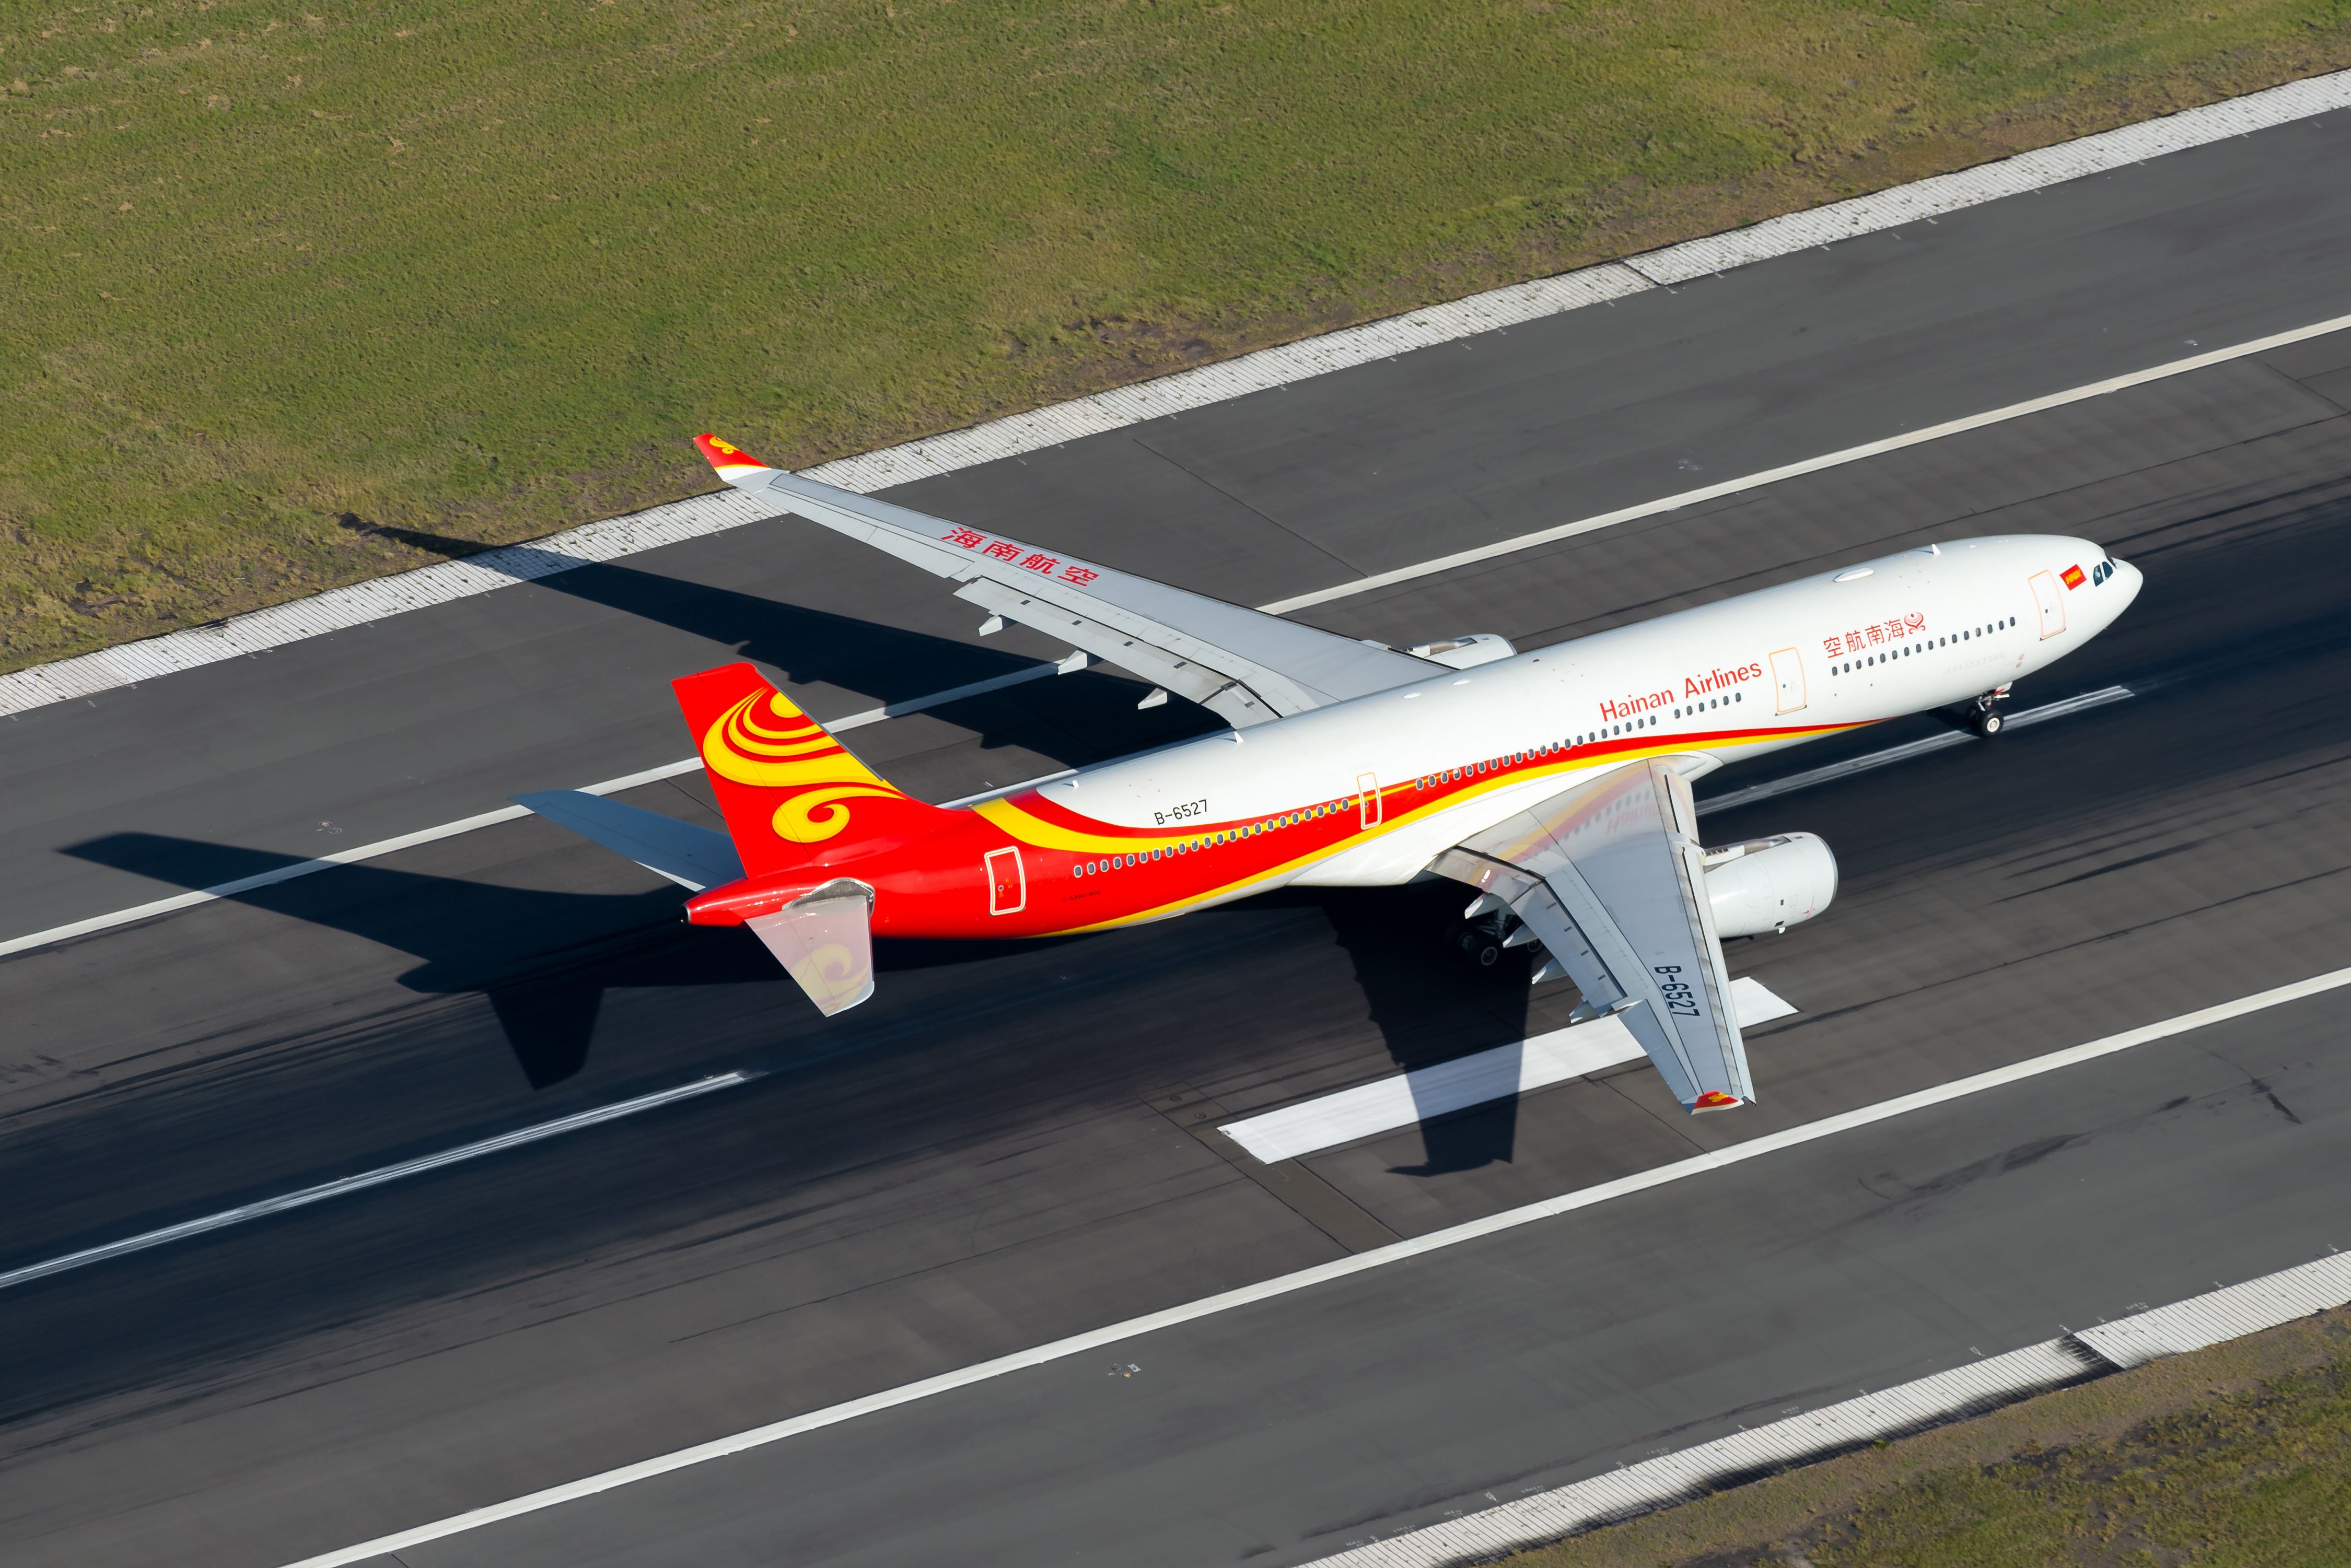 Hainan Airlines Airbus A330